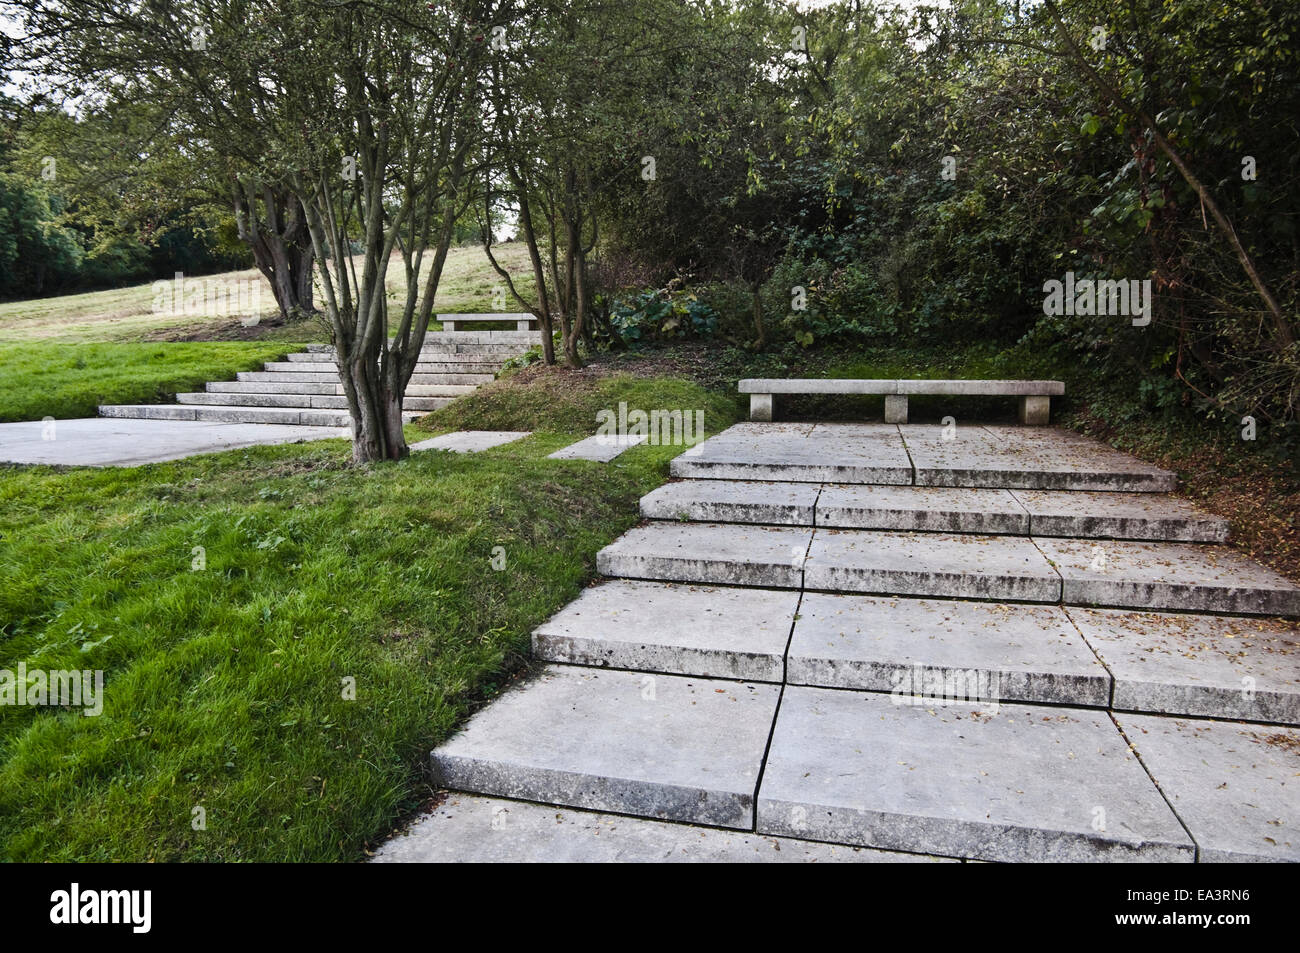 Two Seats of Contemplation and steps - forming a part of the journey relating to the John F Kennedy Memorial at Runnymede, UK. Stock Photo